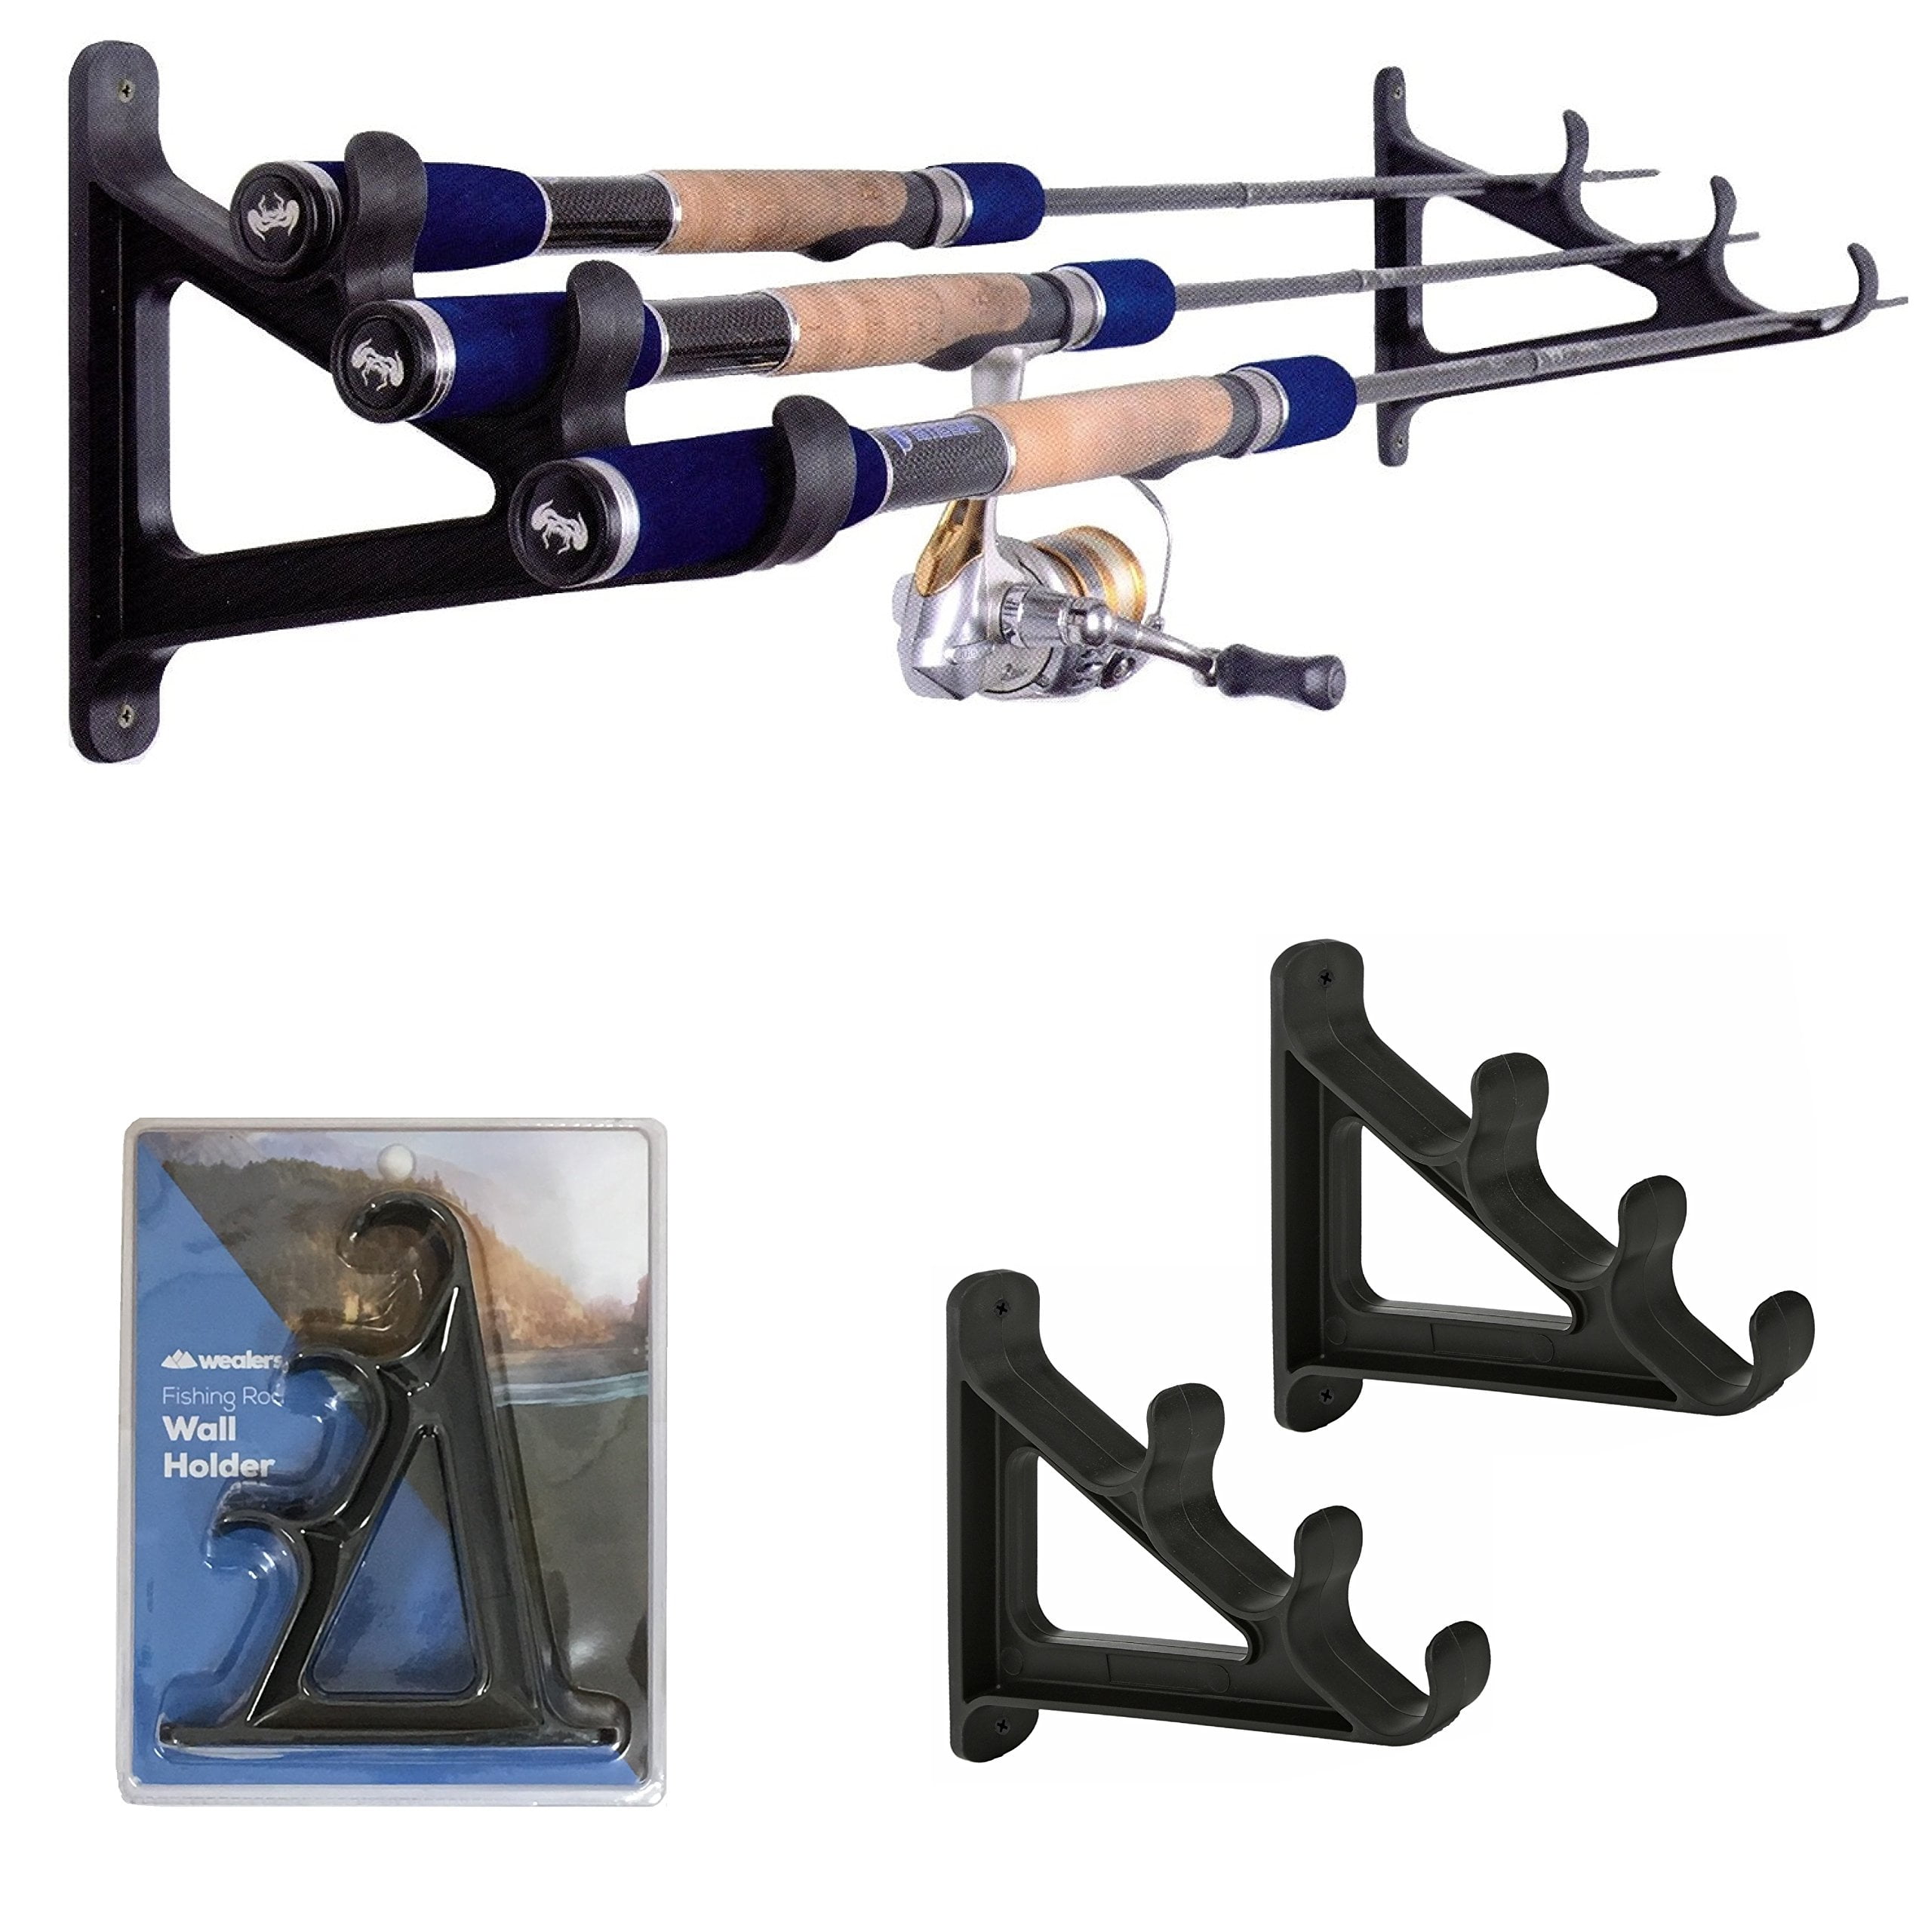 Fishing Pole Holder 6 Poles Wall Mounted Organizer Support for